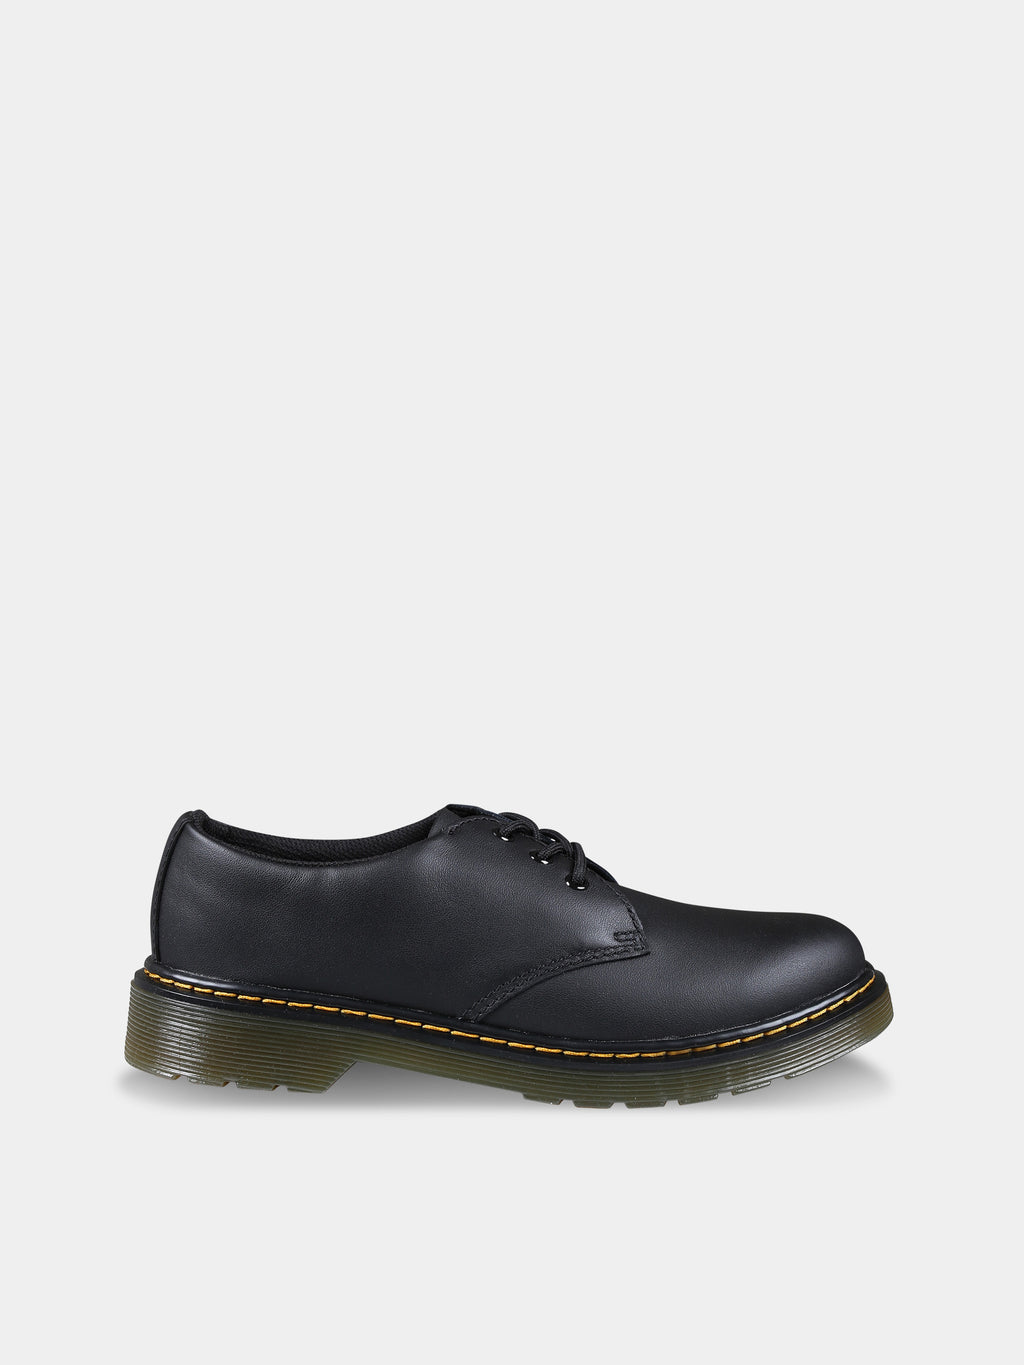 Black Softy T shoes for kids